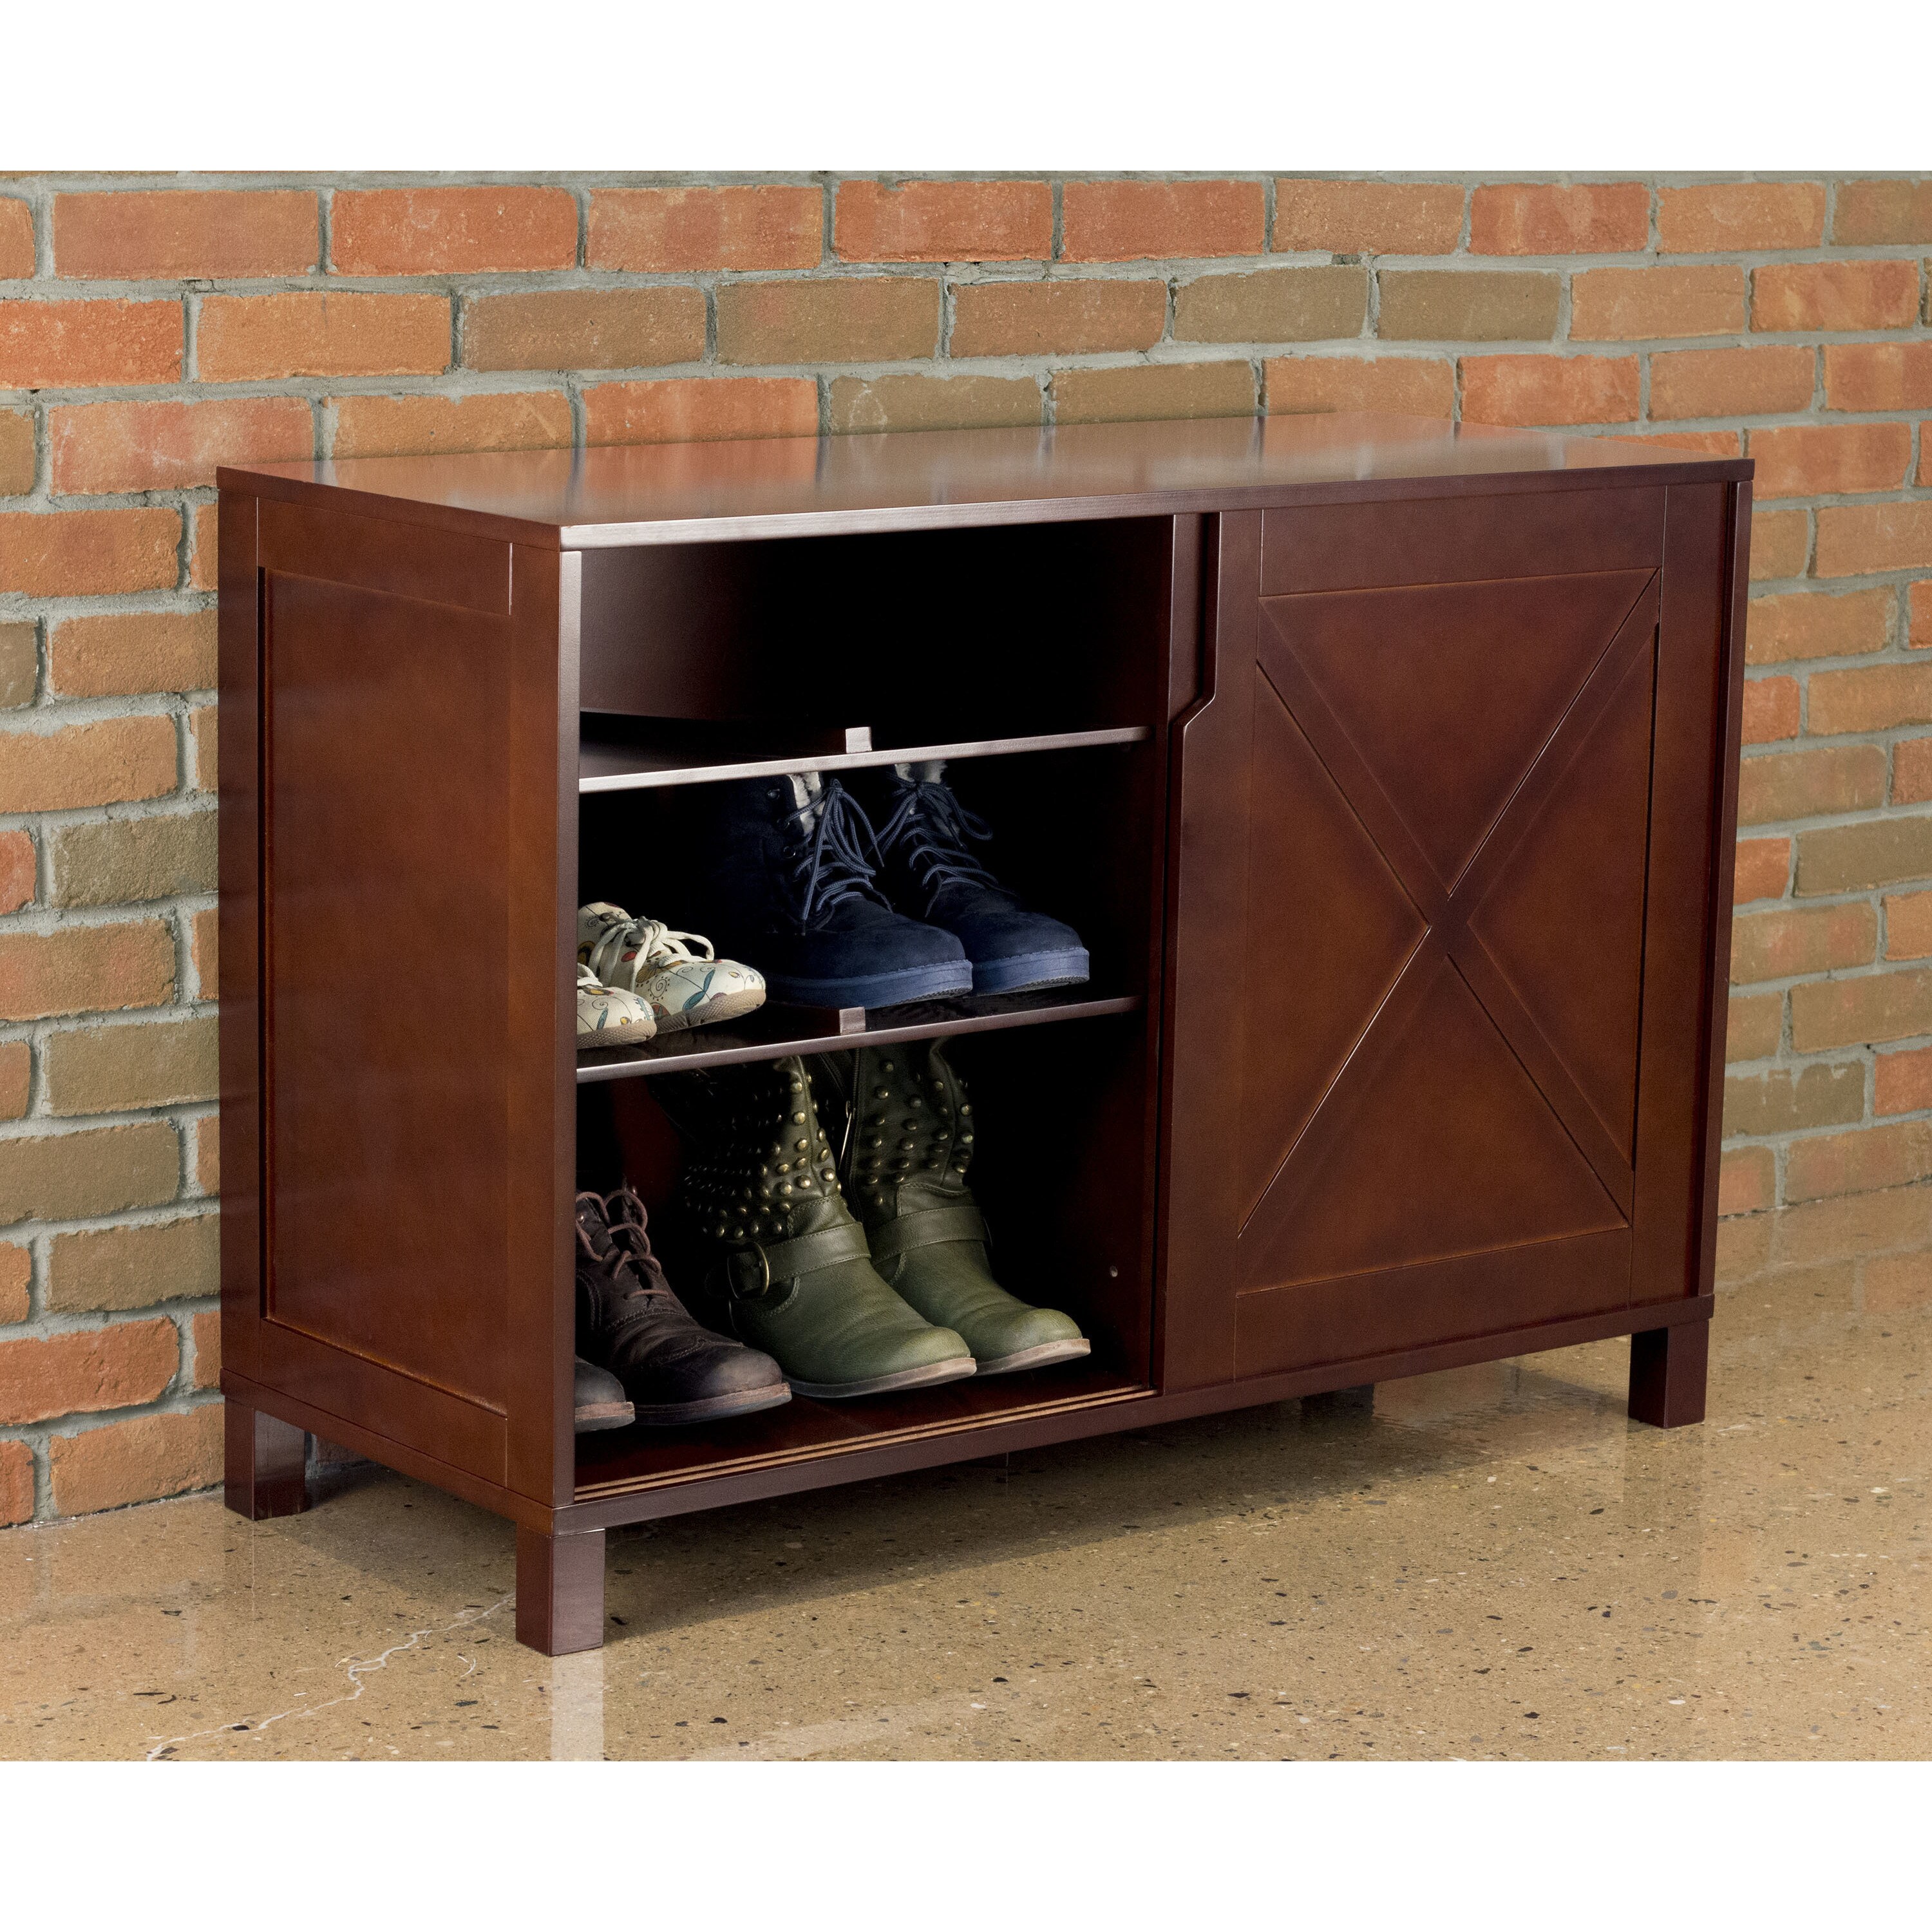 Merry Products Windsor Wood Shoe Dresser Brown Traditional | eBay